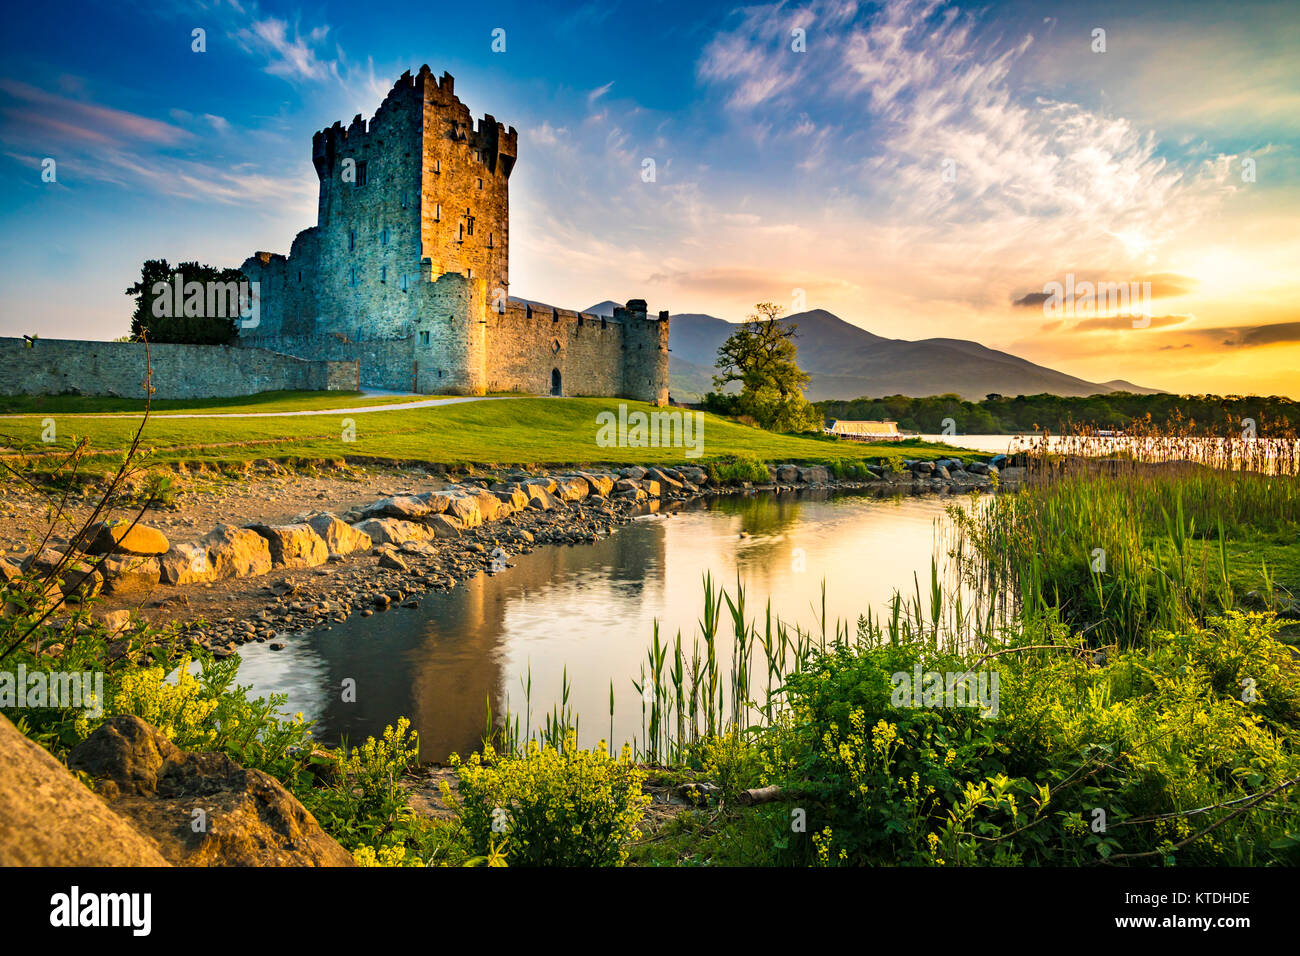 Ancient old Fortress Ross Castle ruin with lake and grass in Ireland during golden hour nobody Stock Photo